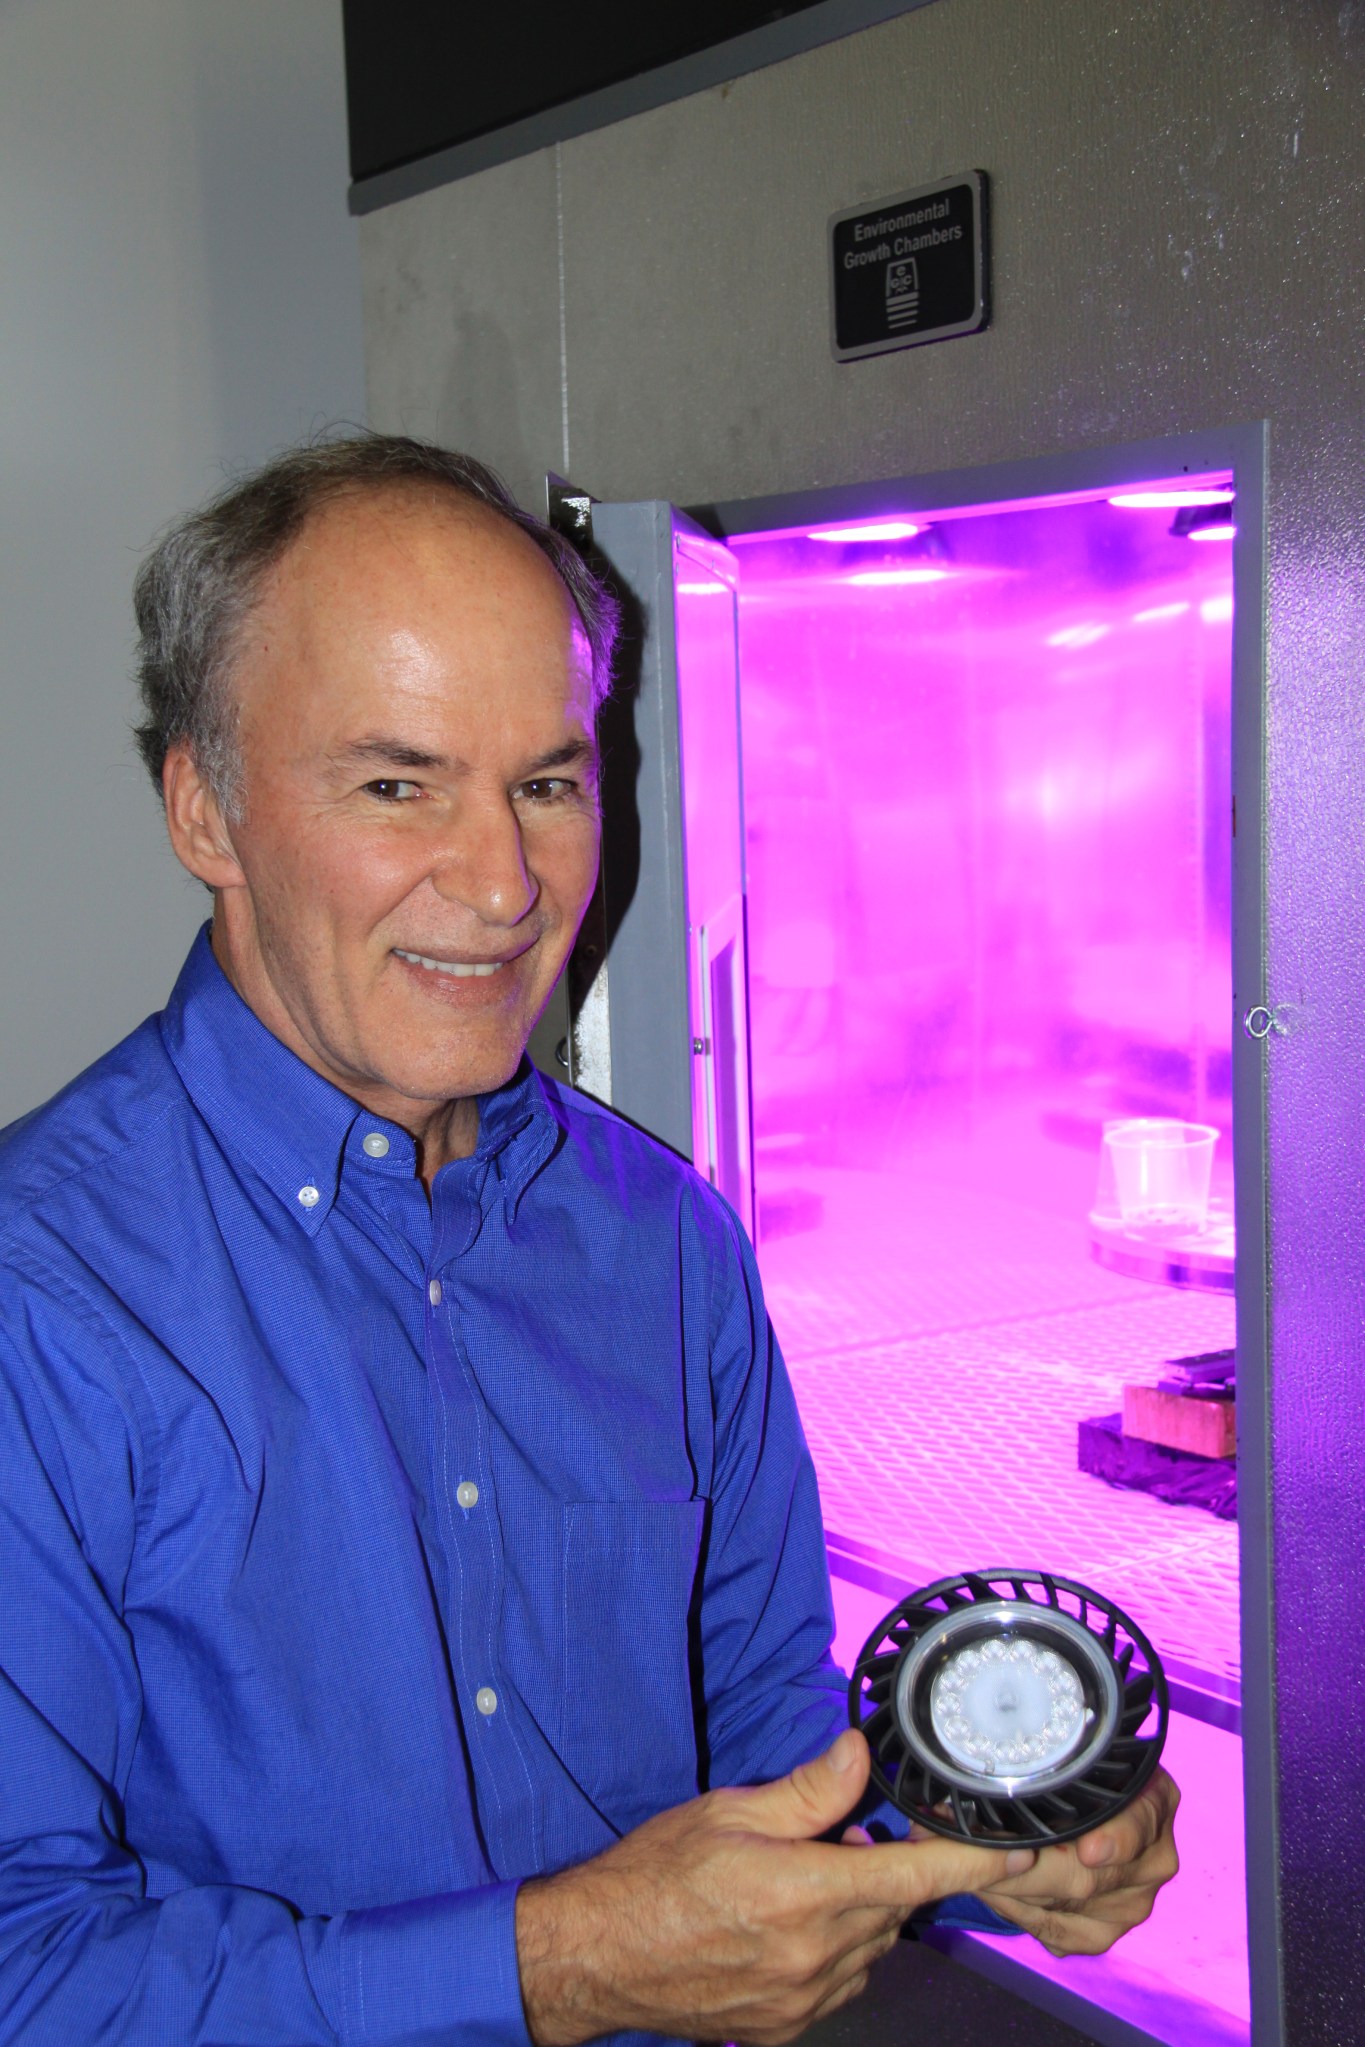 Dr. Ray Wheeler, lead for Advanced Life Support Research activities at Kennedy Space Center, holds a red and blue LED light fixt